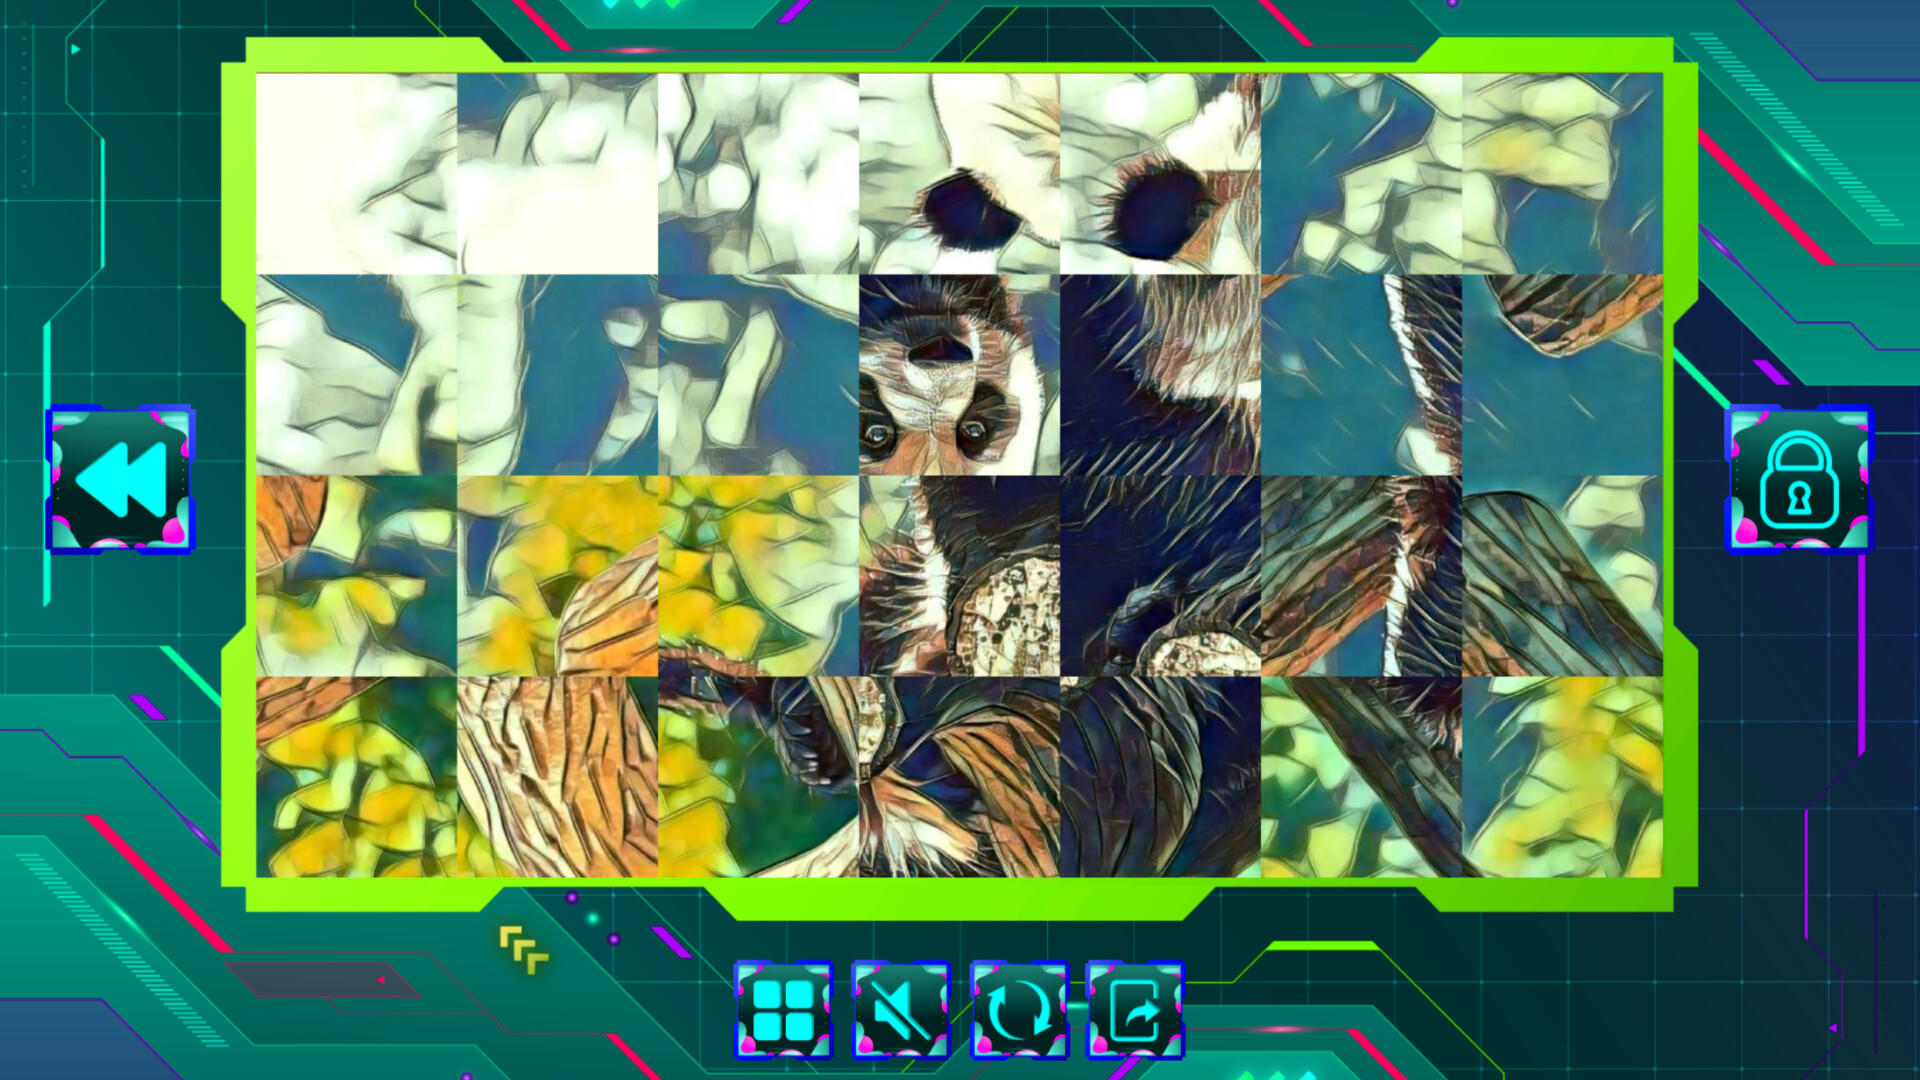 Screenshot 1 of Twizzle Puzzle: Tiere 